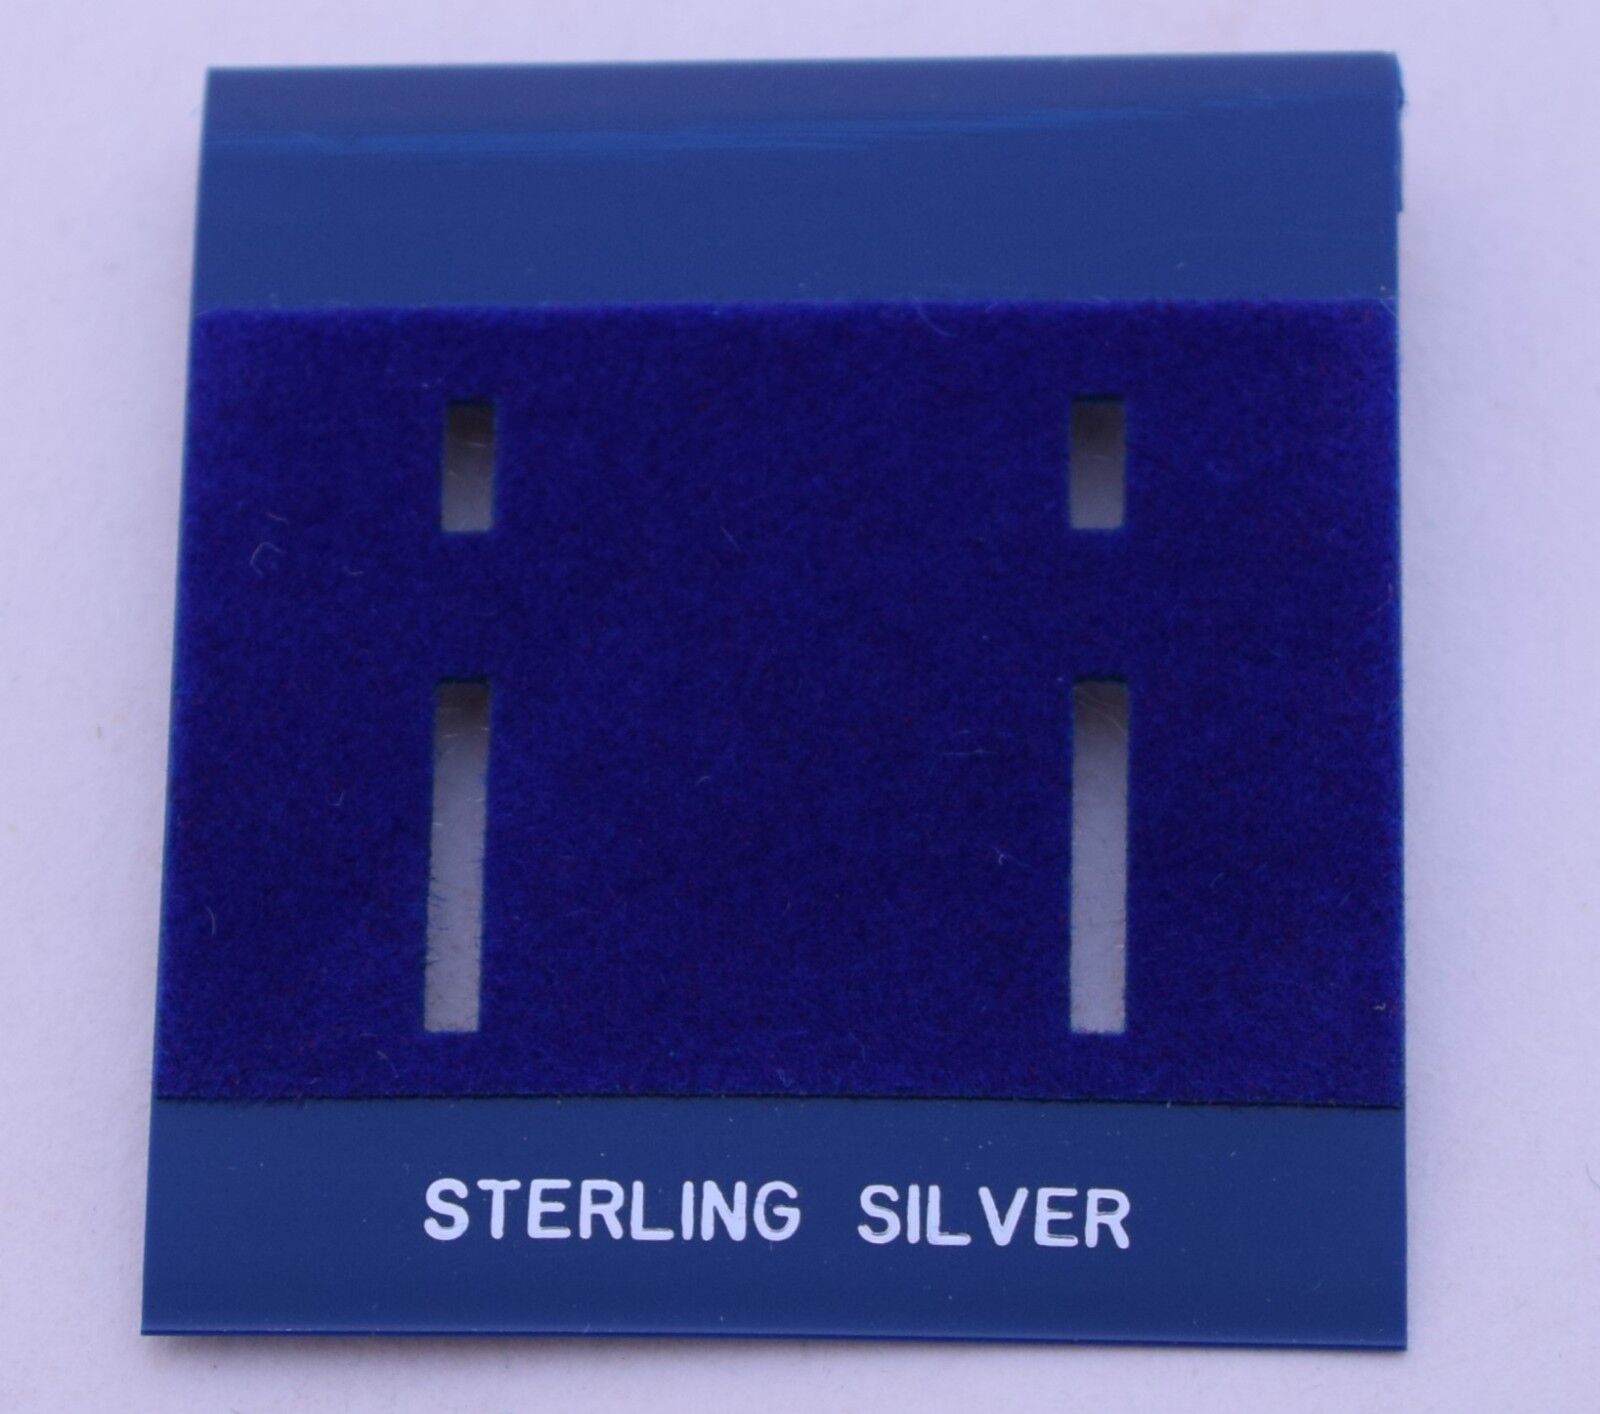 75ct Sterling Silver Blue Plastic Holder Hanging Earring Display Card Unbranded/Generic Does Not Apply